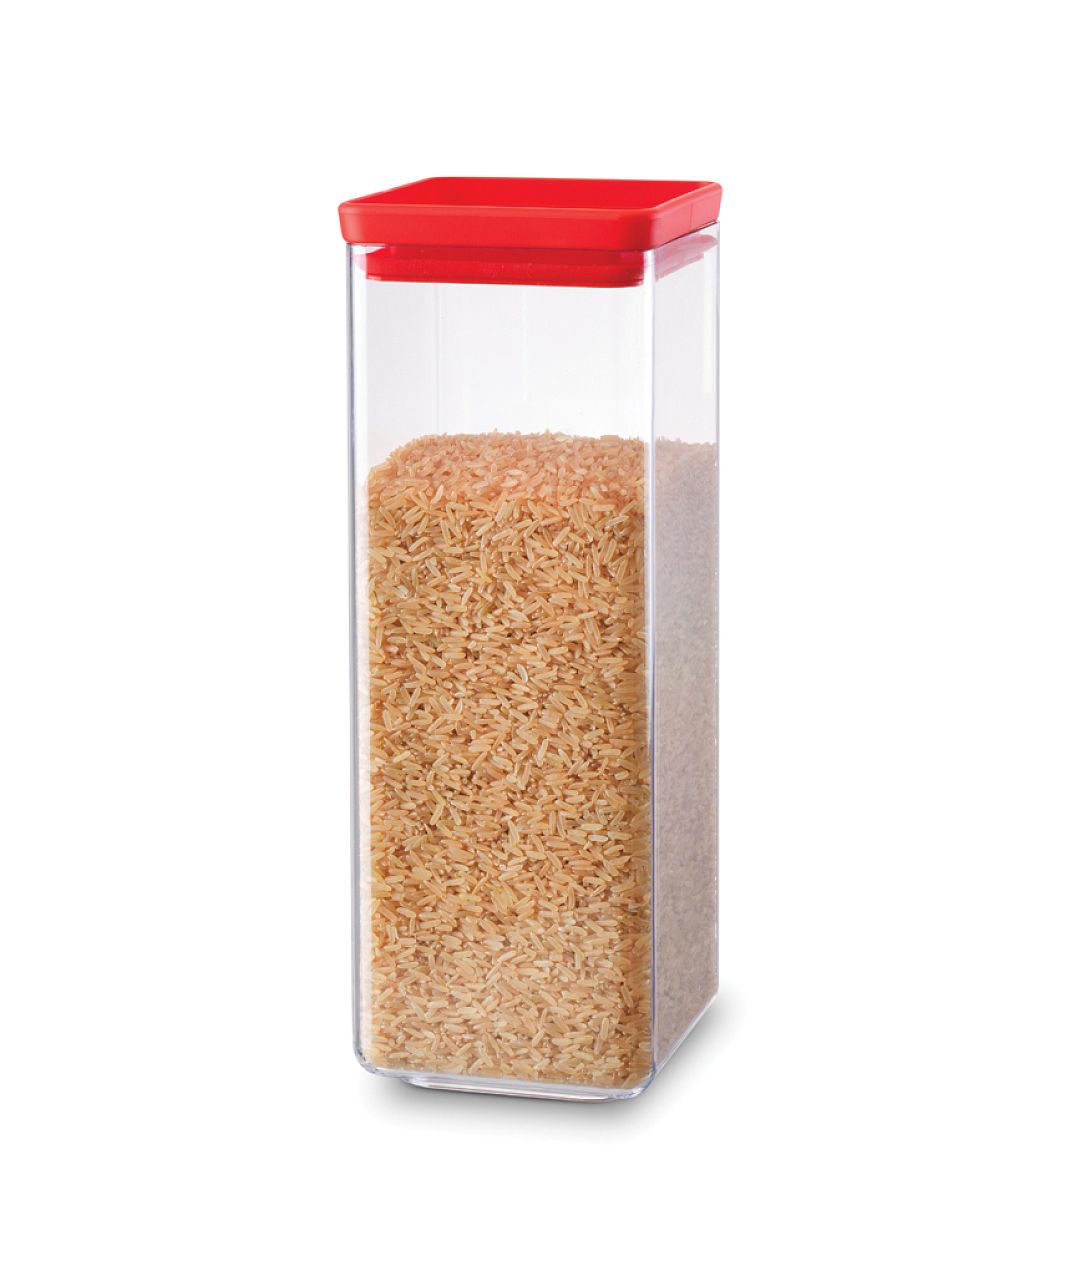 Square Canister, 2.5L Tasty Colours Red 8710755290046 Brabantia 867x1024px E NR 9135